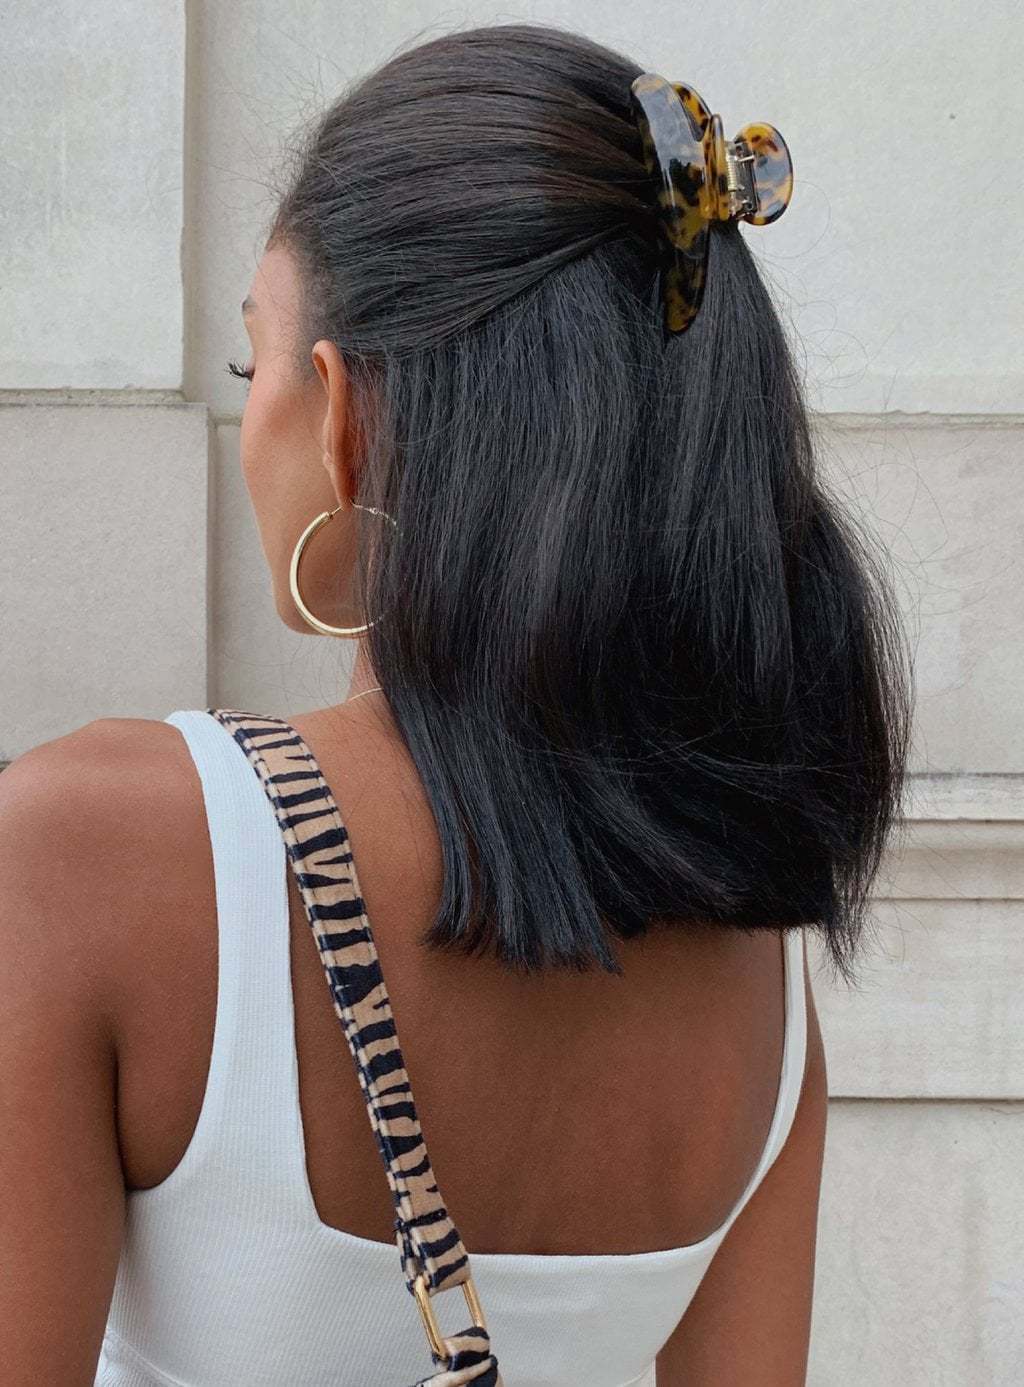 11 Cute, Nice And Chic School Hairstyles For Medium Hair